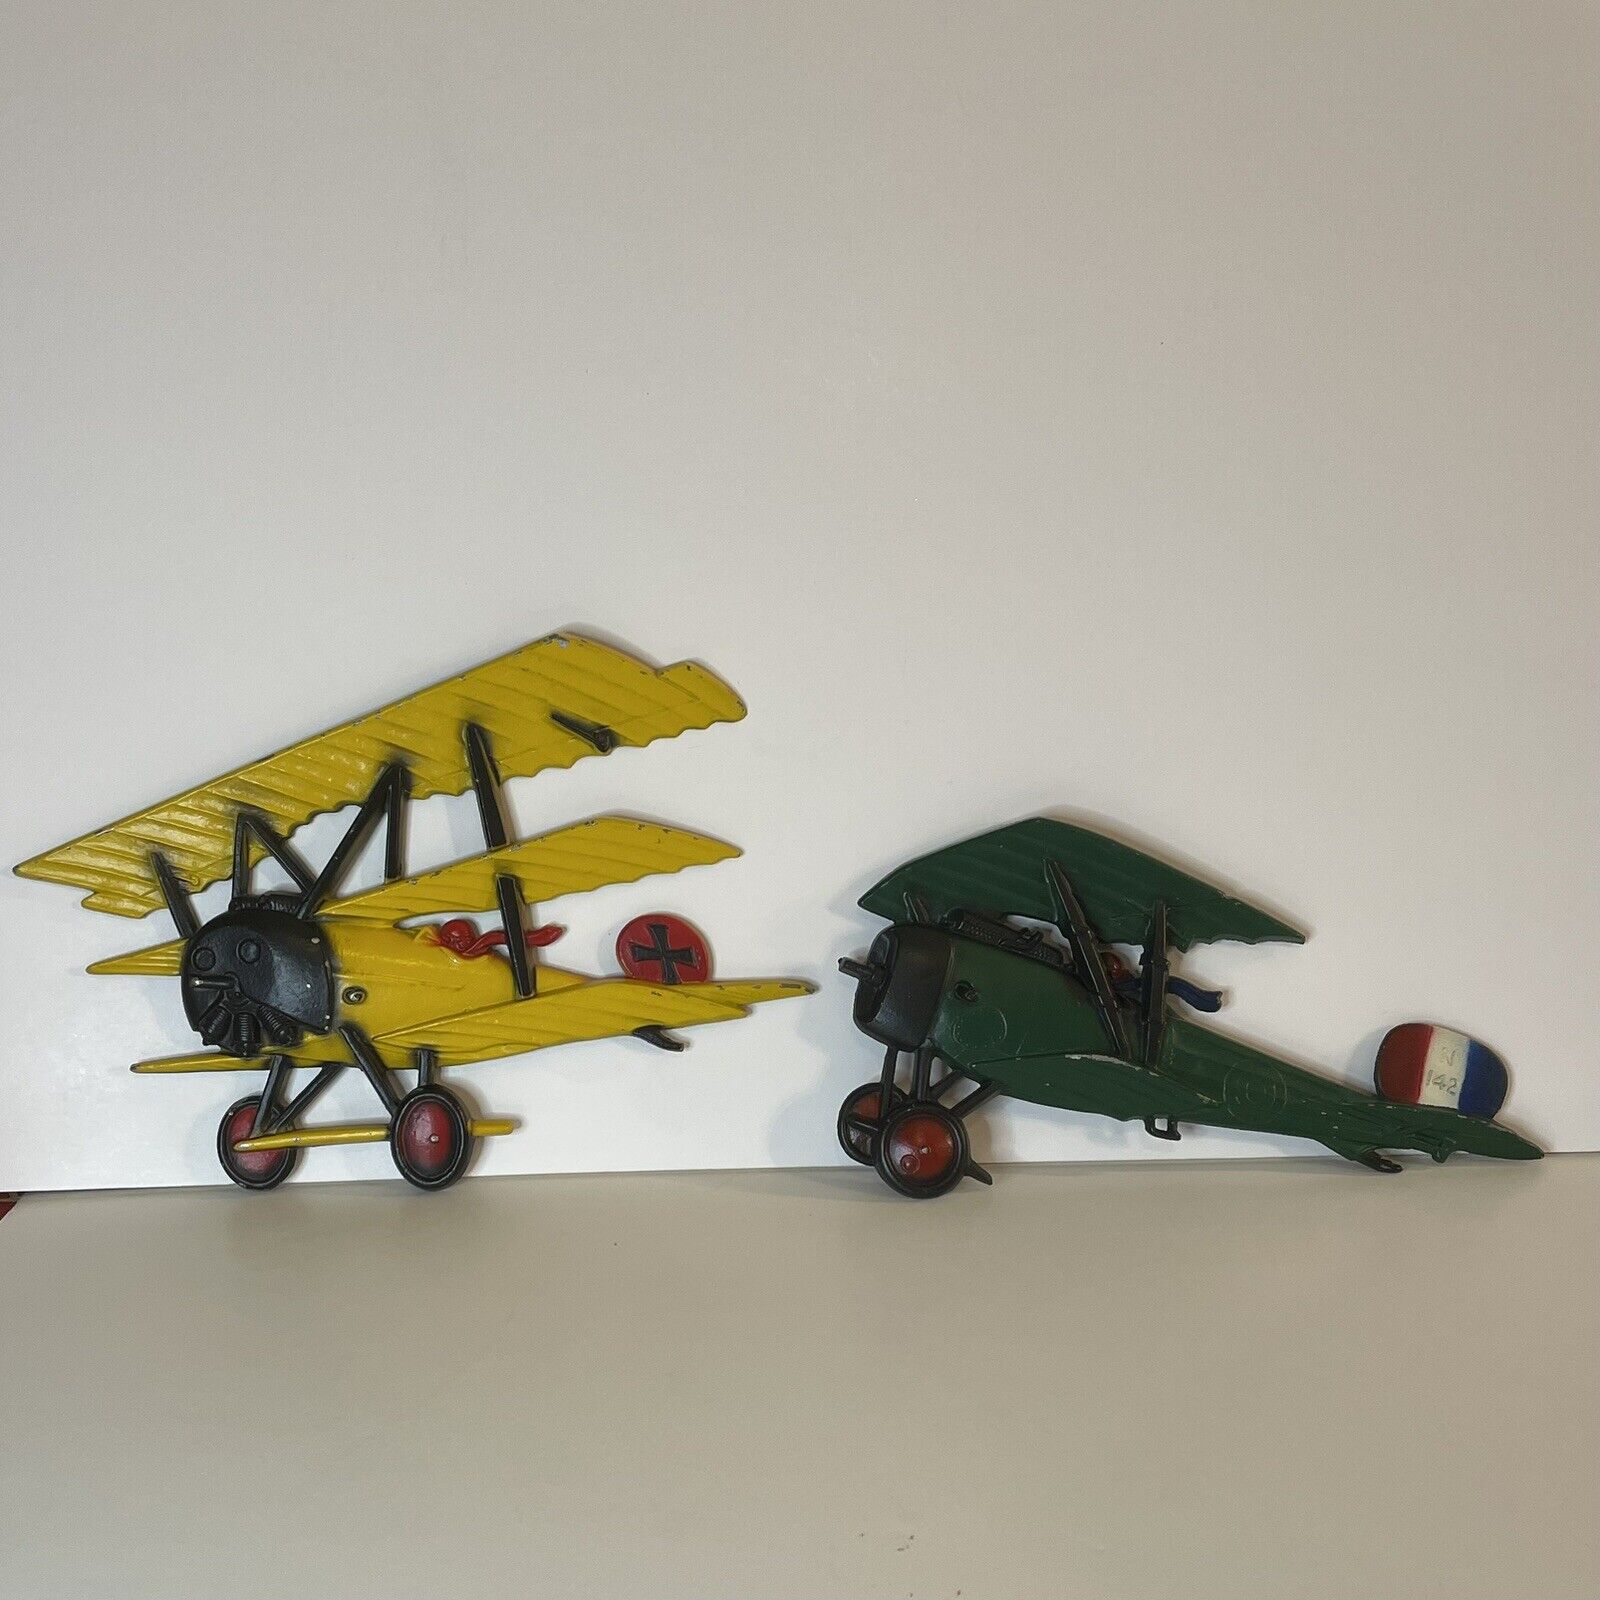 Vintage 1975 Cast Metal Airplane Wall Plaques For Decoration Set Of 2 Homco USA